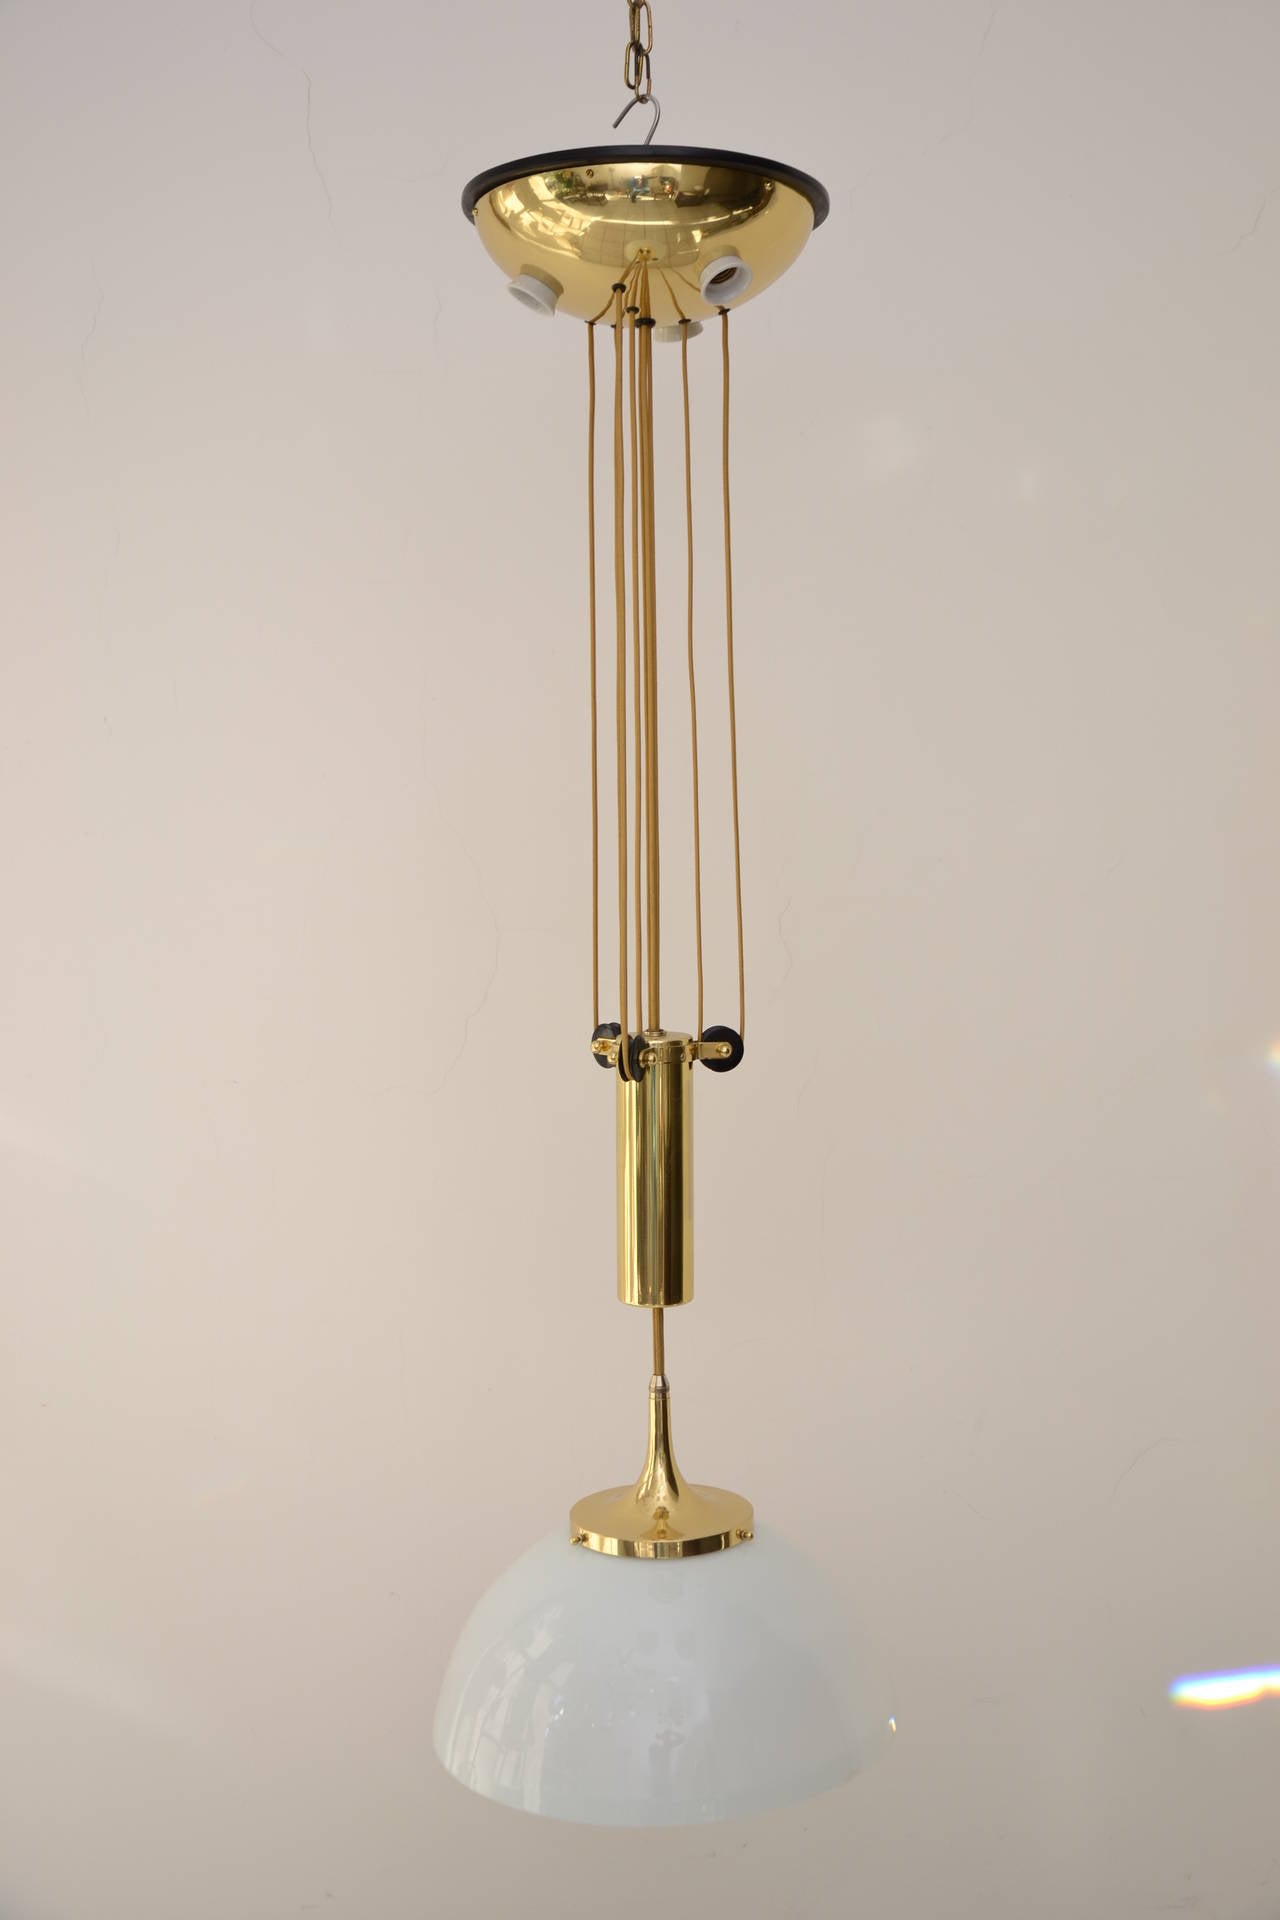 Adjustable chandelier, Vienna, circa 1905.
Brass polished and stove enamelled.